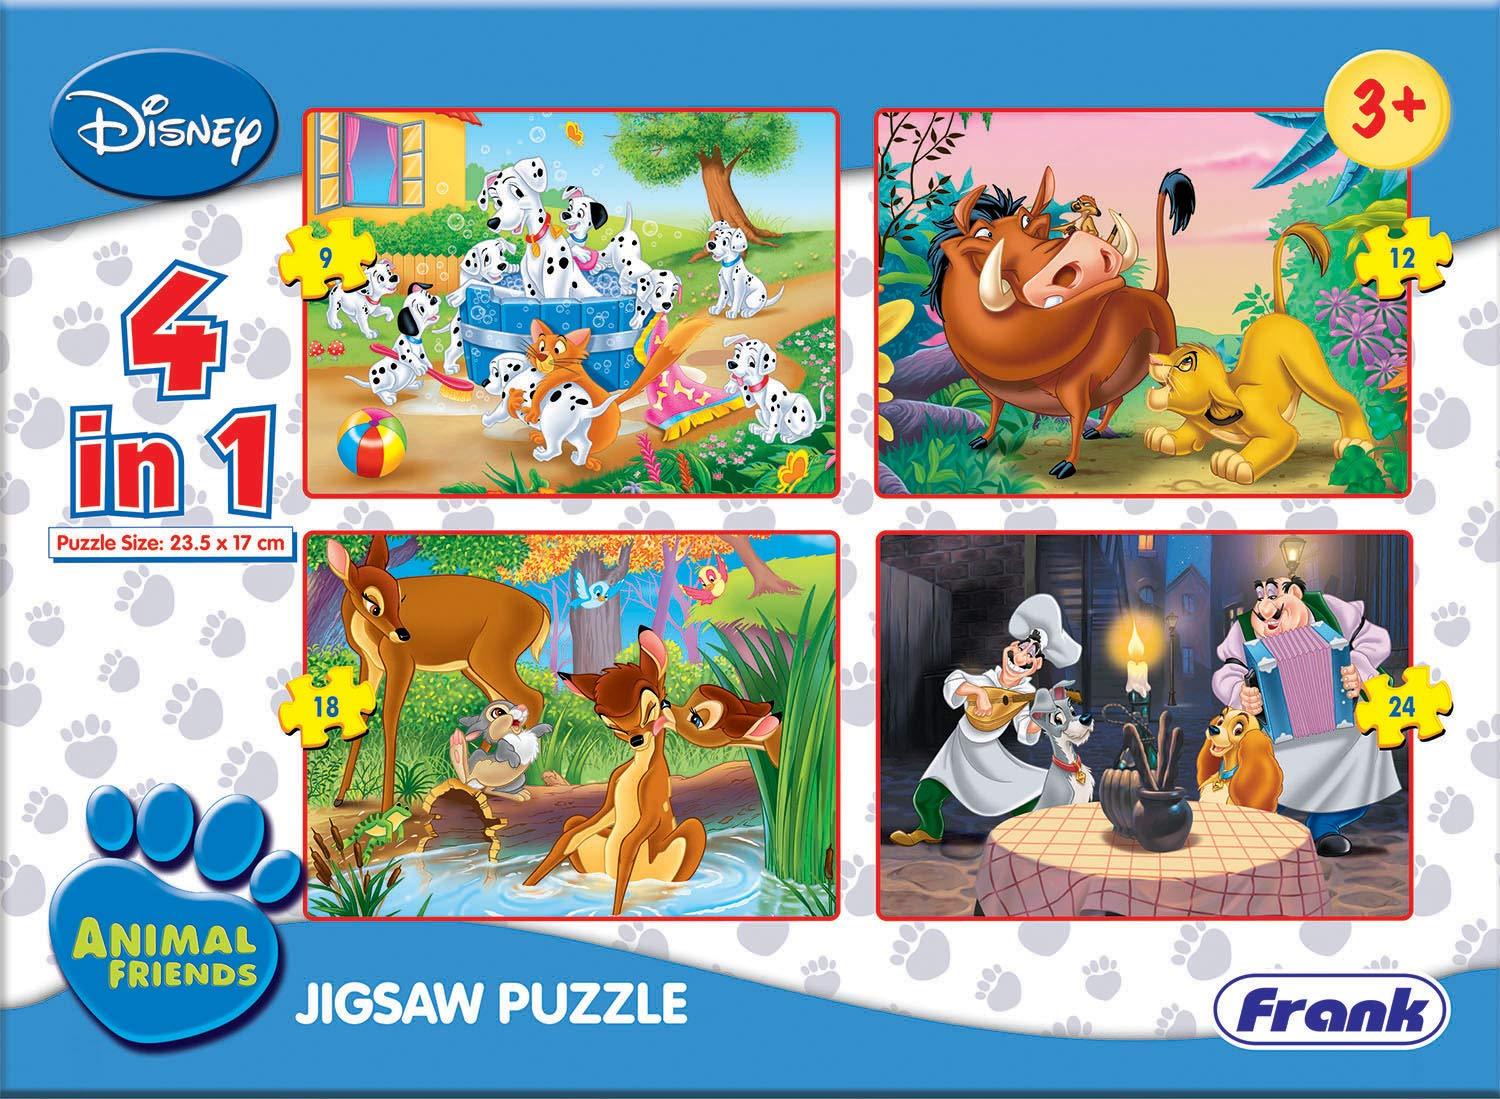 Frank Disney Animal Friends 4 in 1 Puzzles - A Set of 4 Jigsaw Puzzles for 3 Year Old Kids and Above